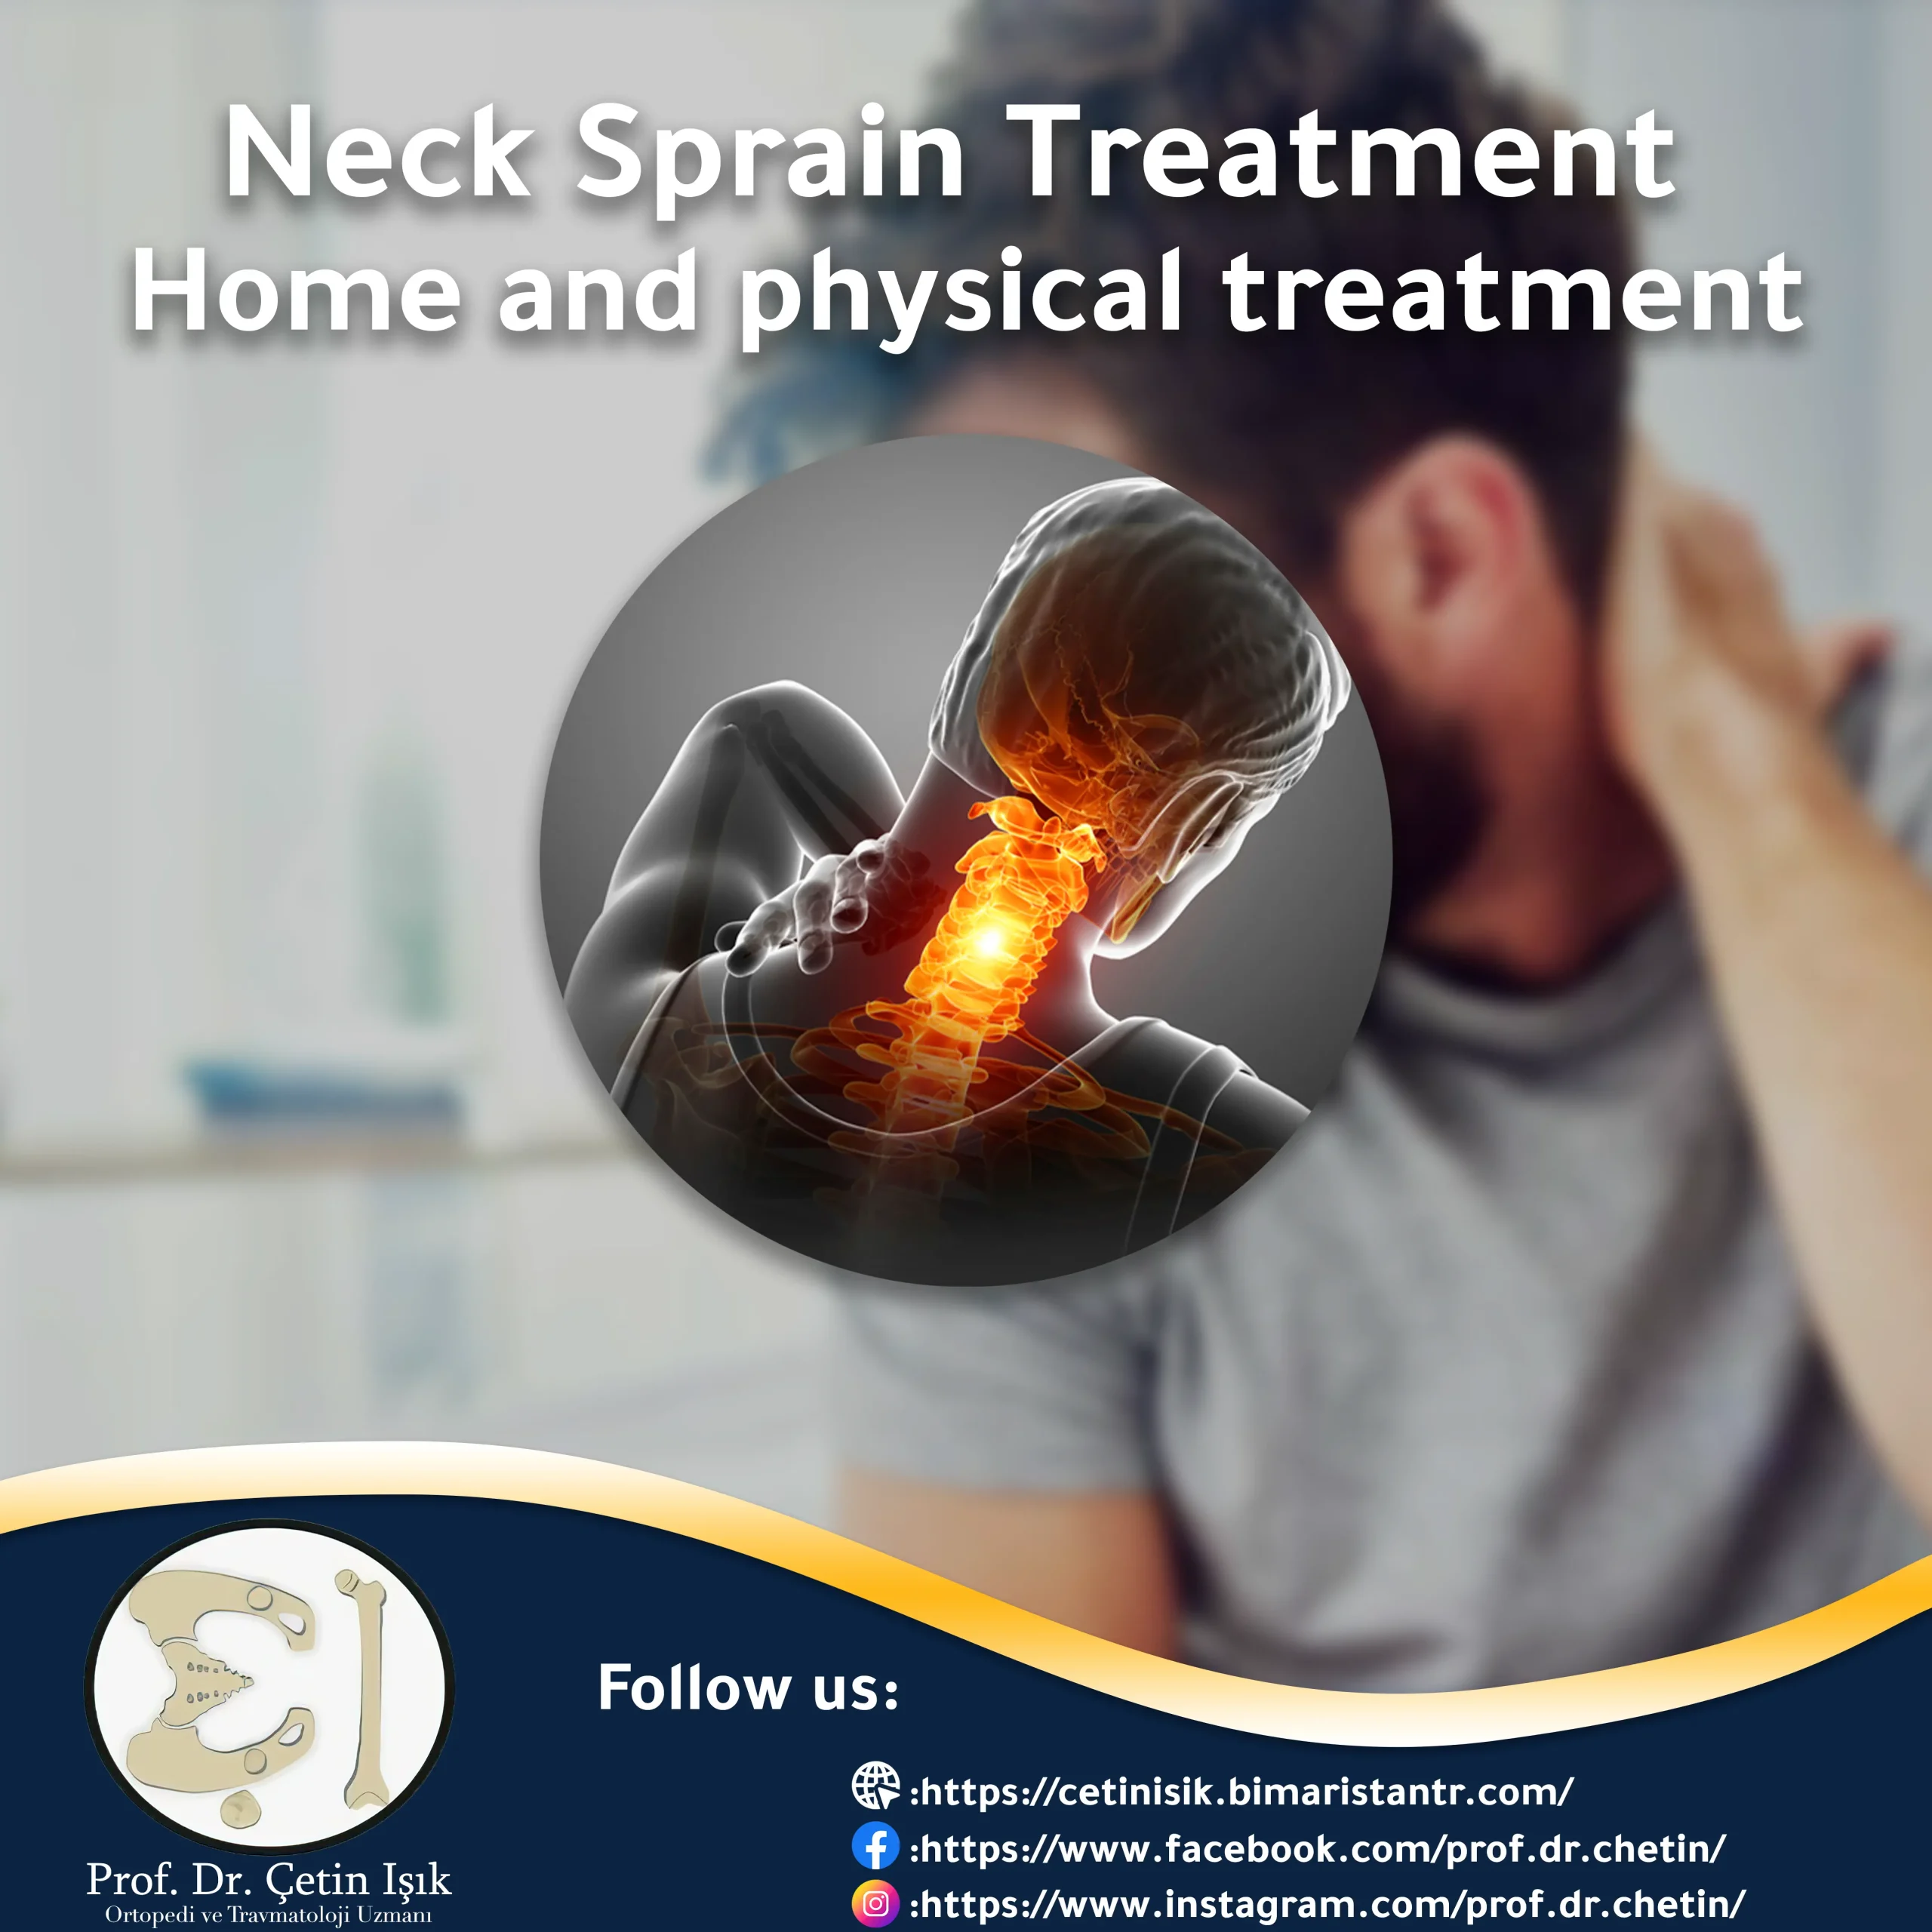 Home and natural neck sprain treatment